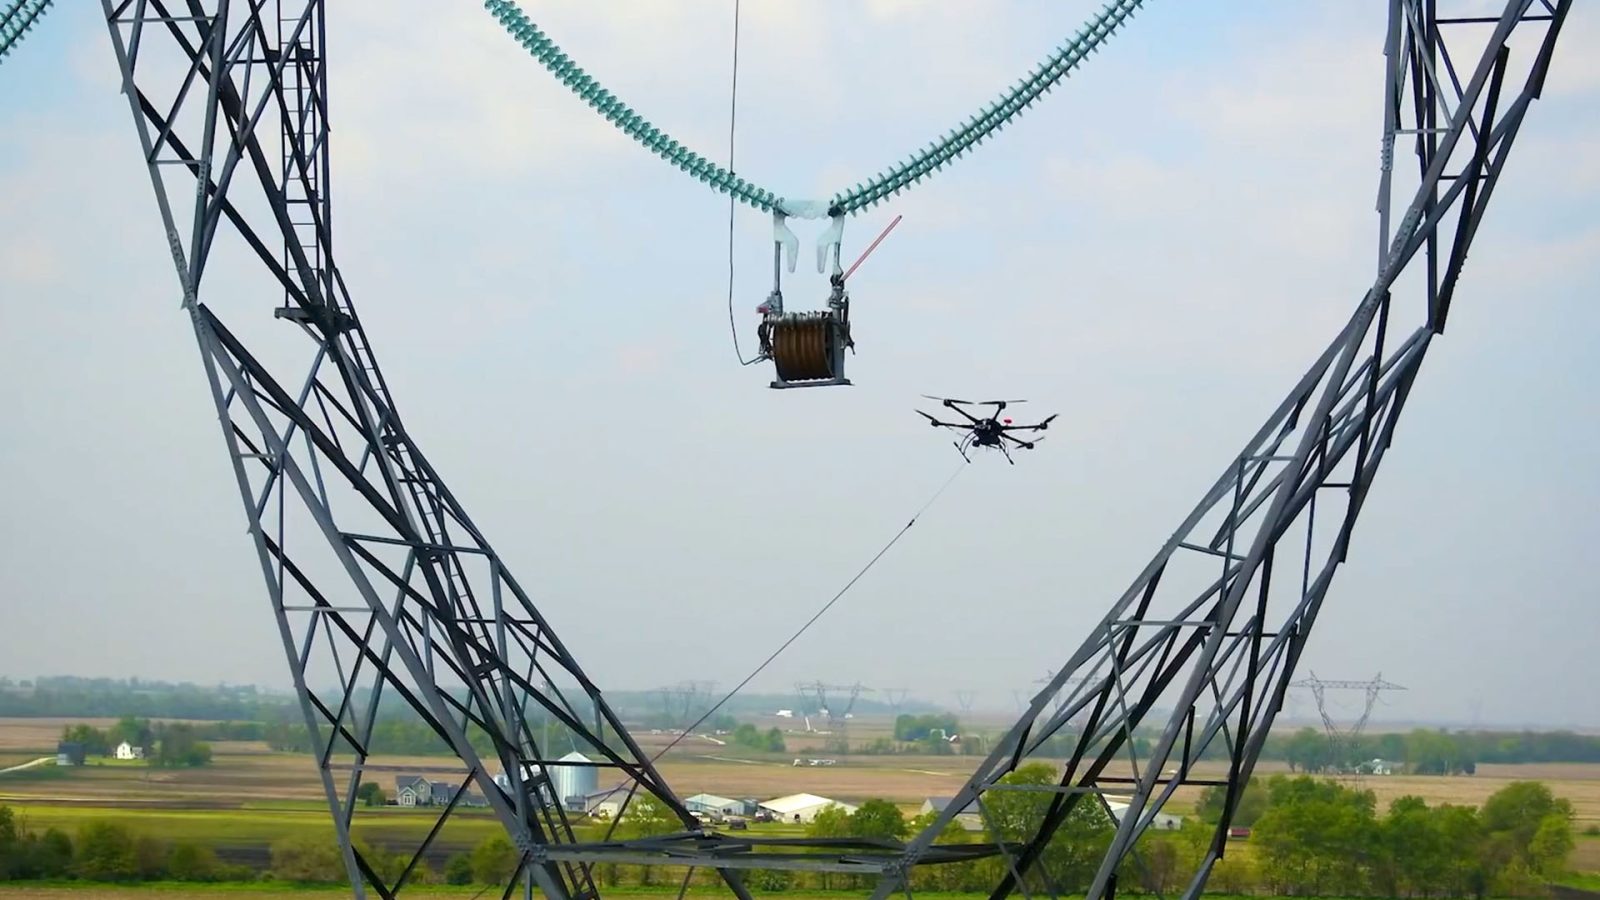 This drone helps workers carry power lines between high towers [Demonstration video]